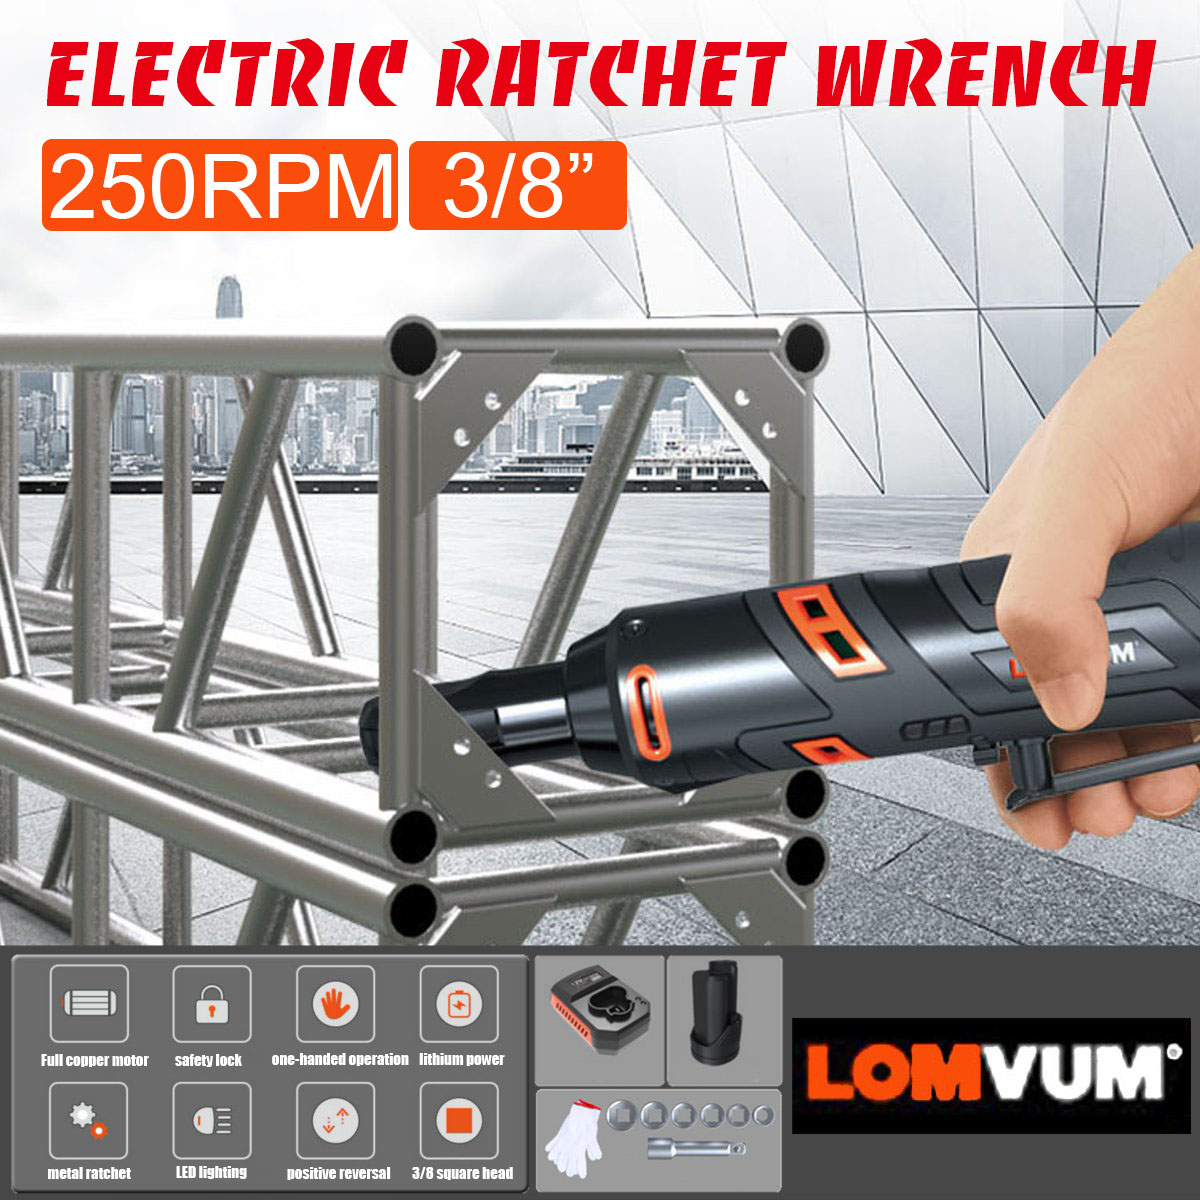 60NM-Cordless-Electric-Ratchet-Wrench-Set-with-12V-Lithium-Ion-Battery-and-Charger-90-Degree-Right-A-1429509-3